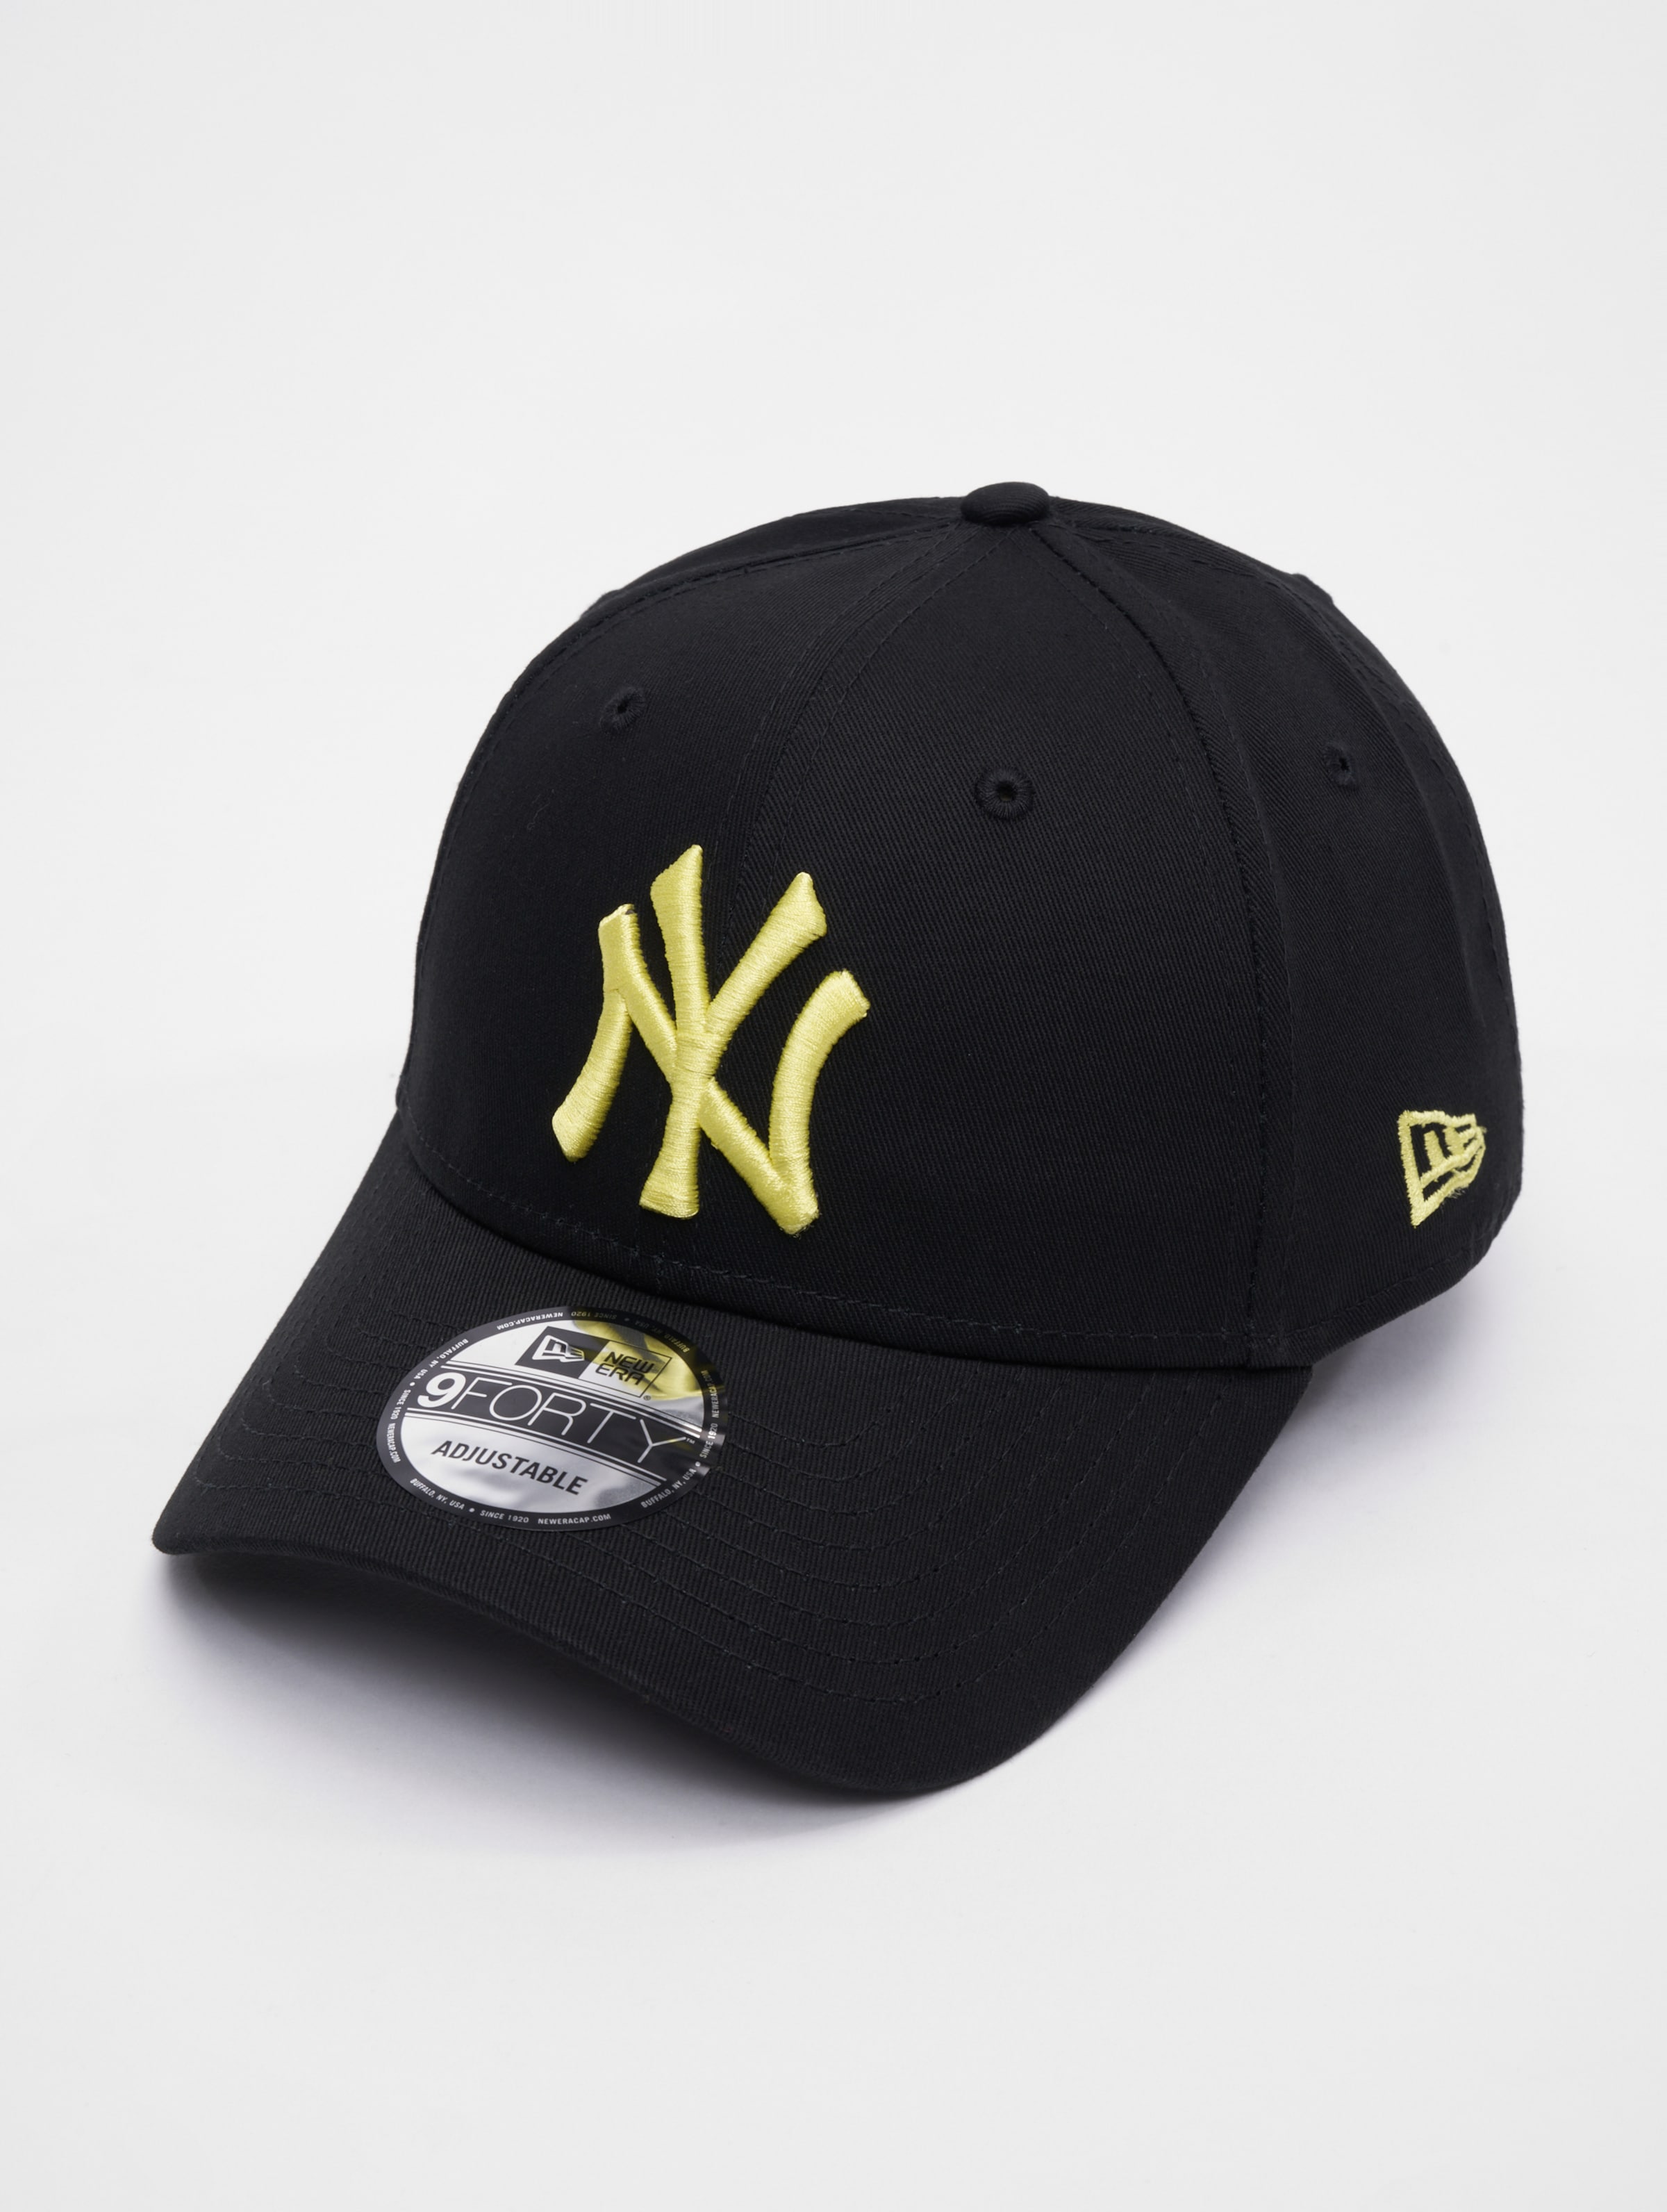 New York Yankees League Essential Black with Yellow Florescent 9FORTY Adjustable Cap